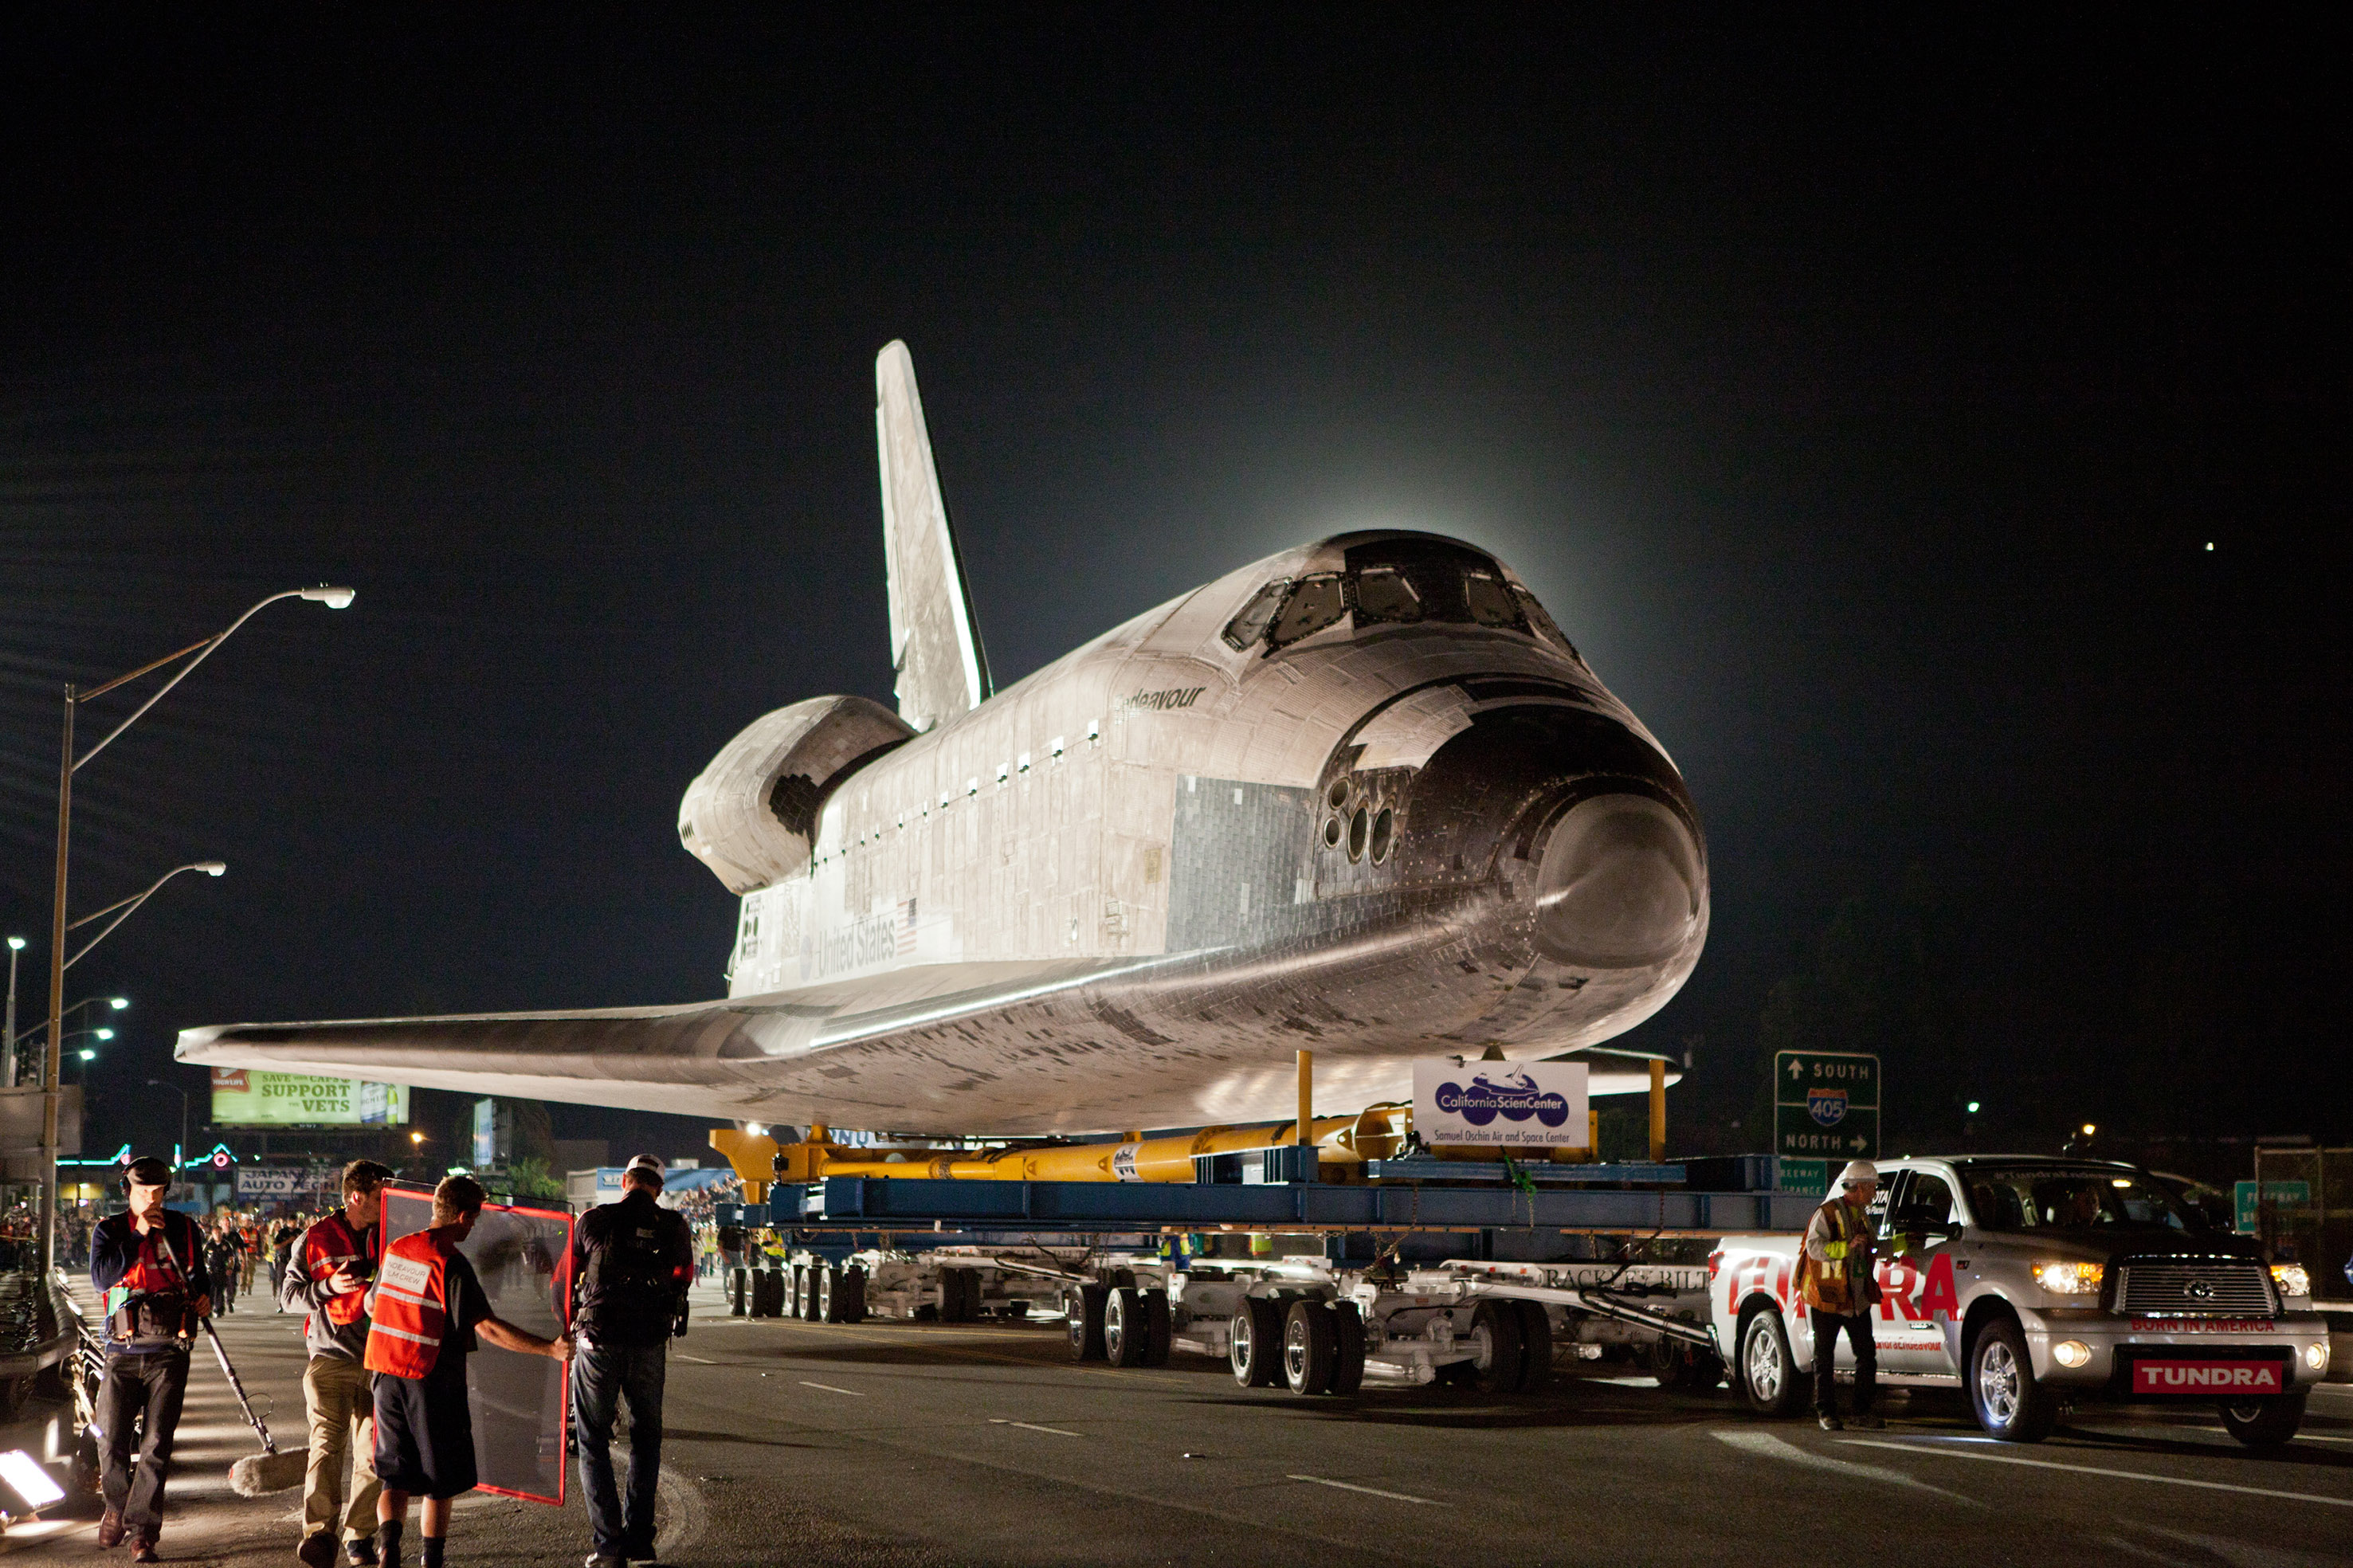 Toyota Tundra Ute Tows a 68 tonne Space Shuttle